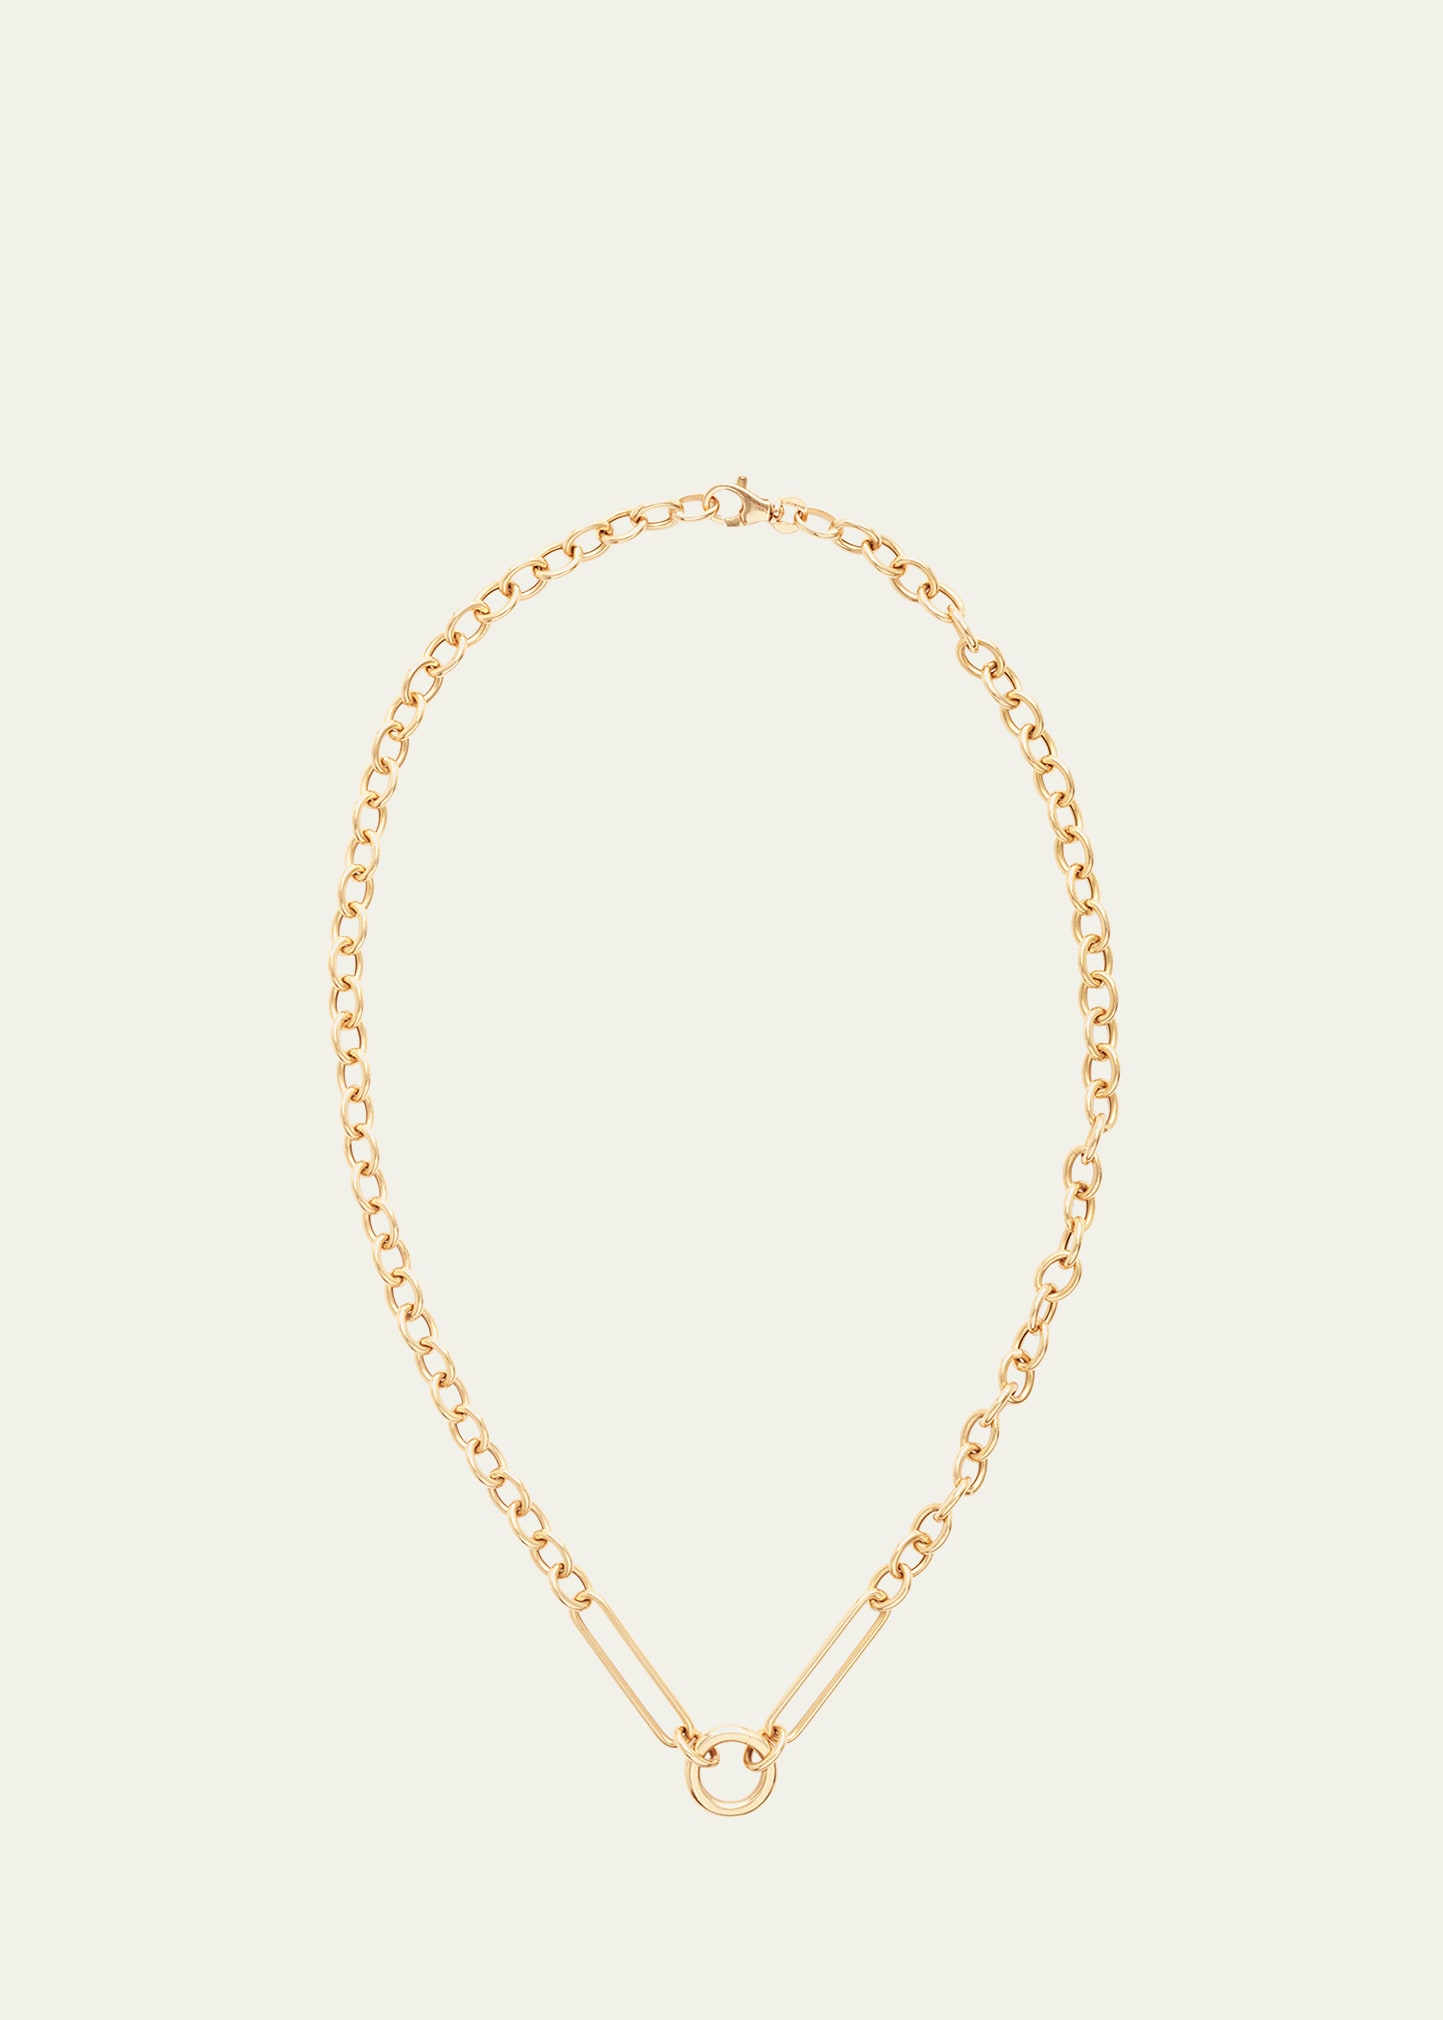 18K Gold Chain Necklace with Connector Link